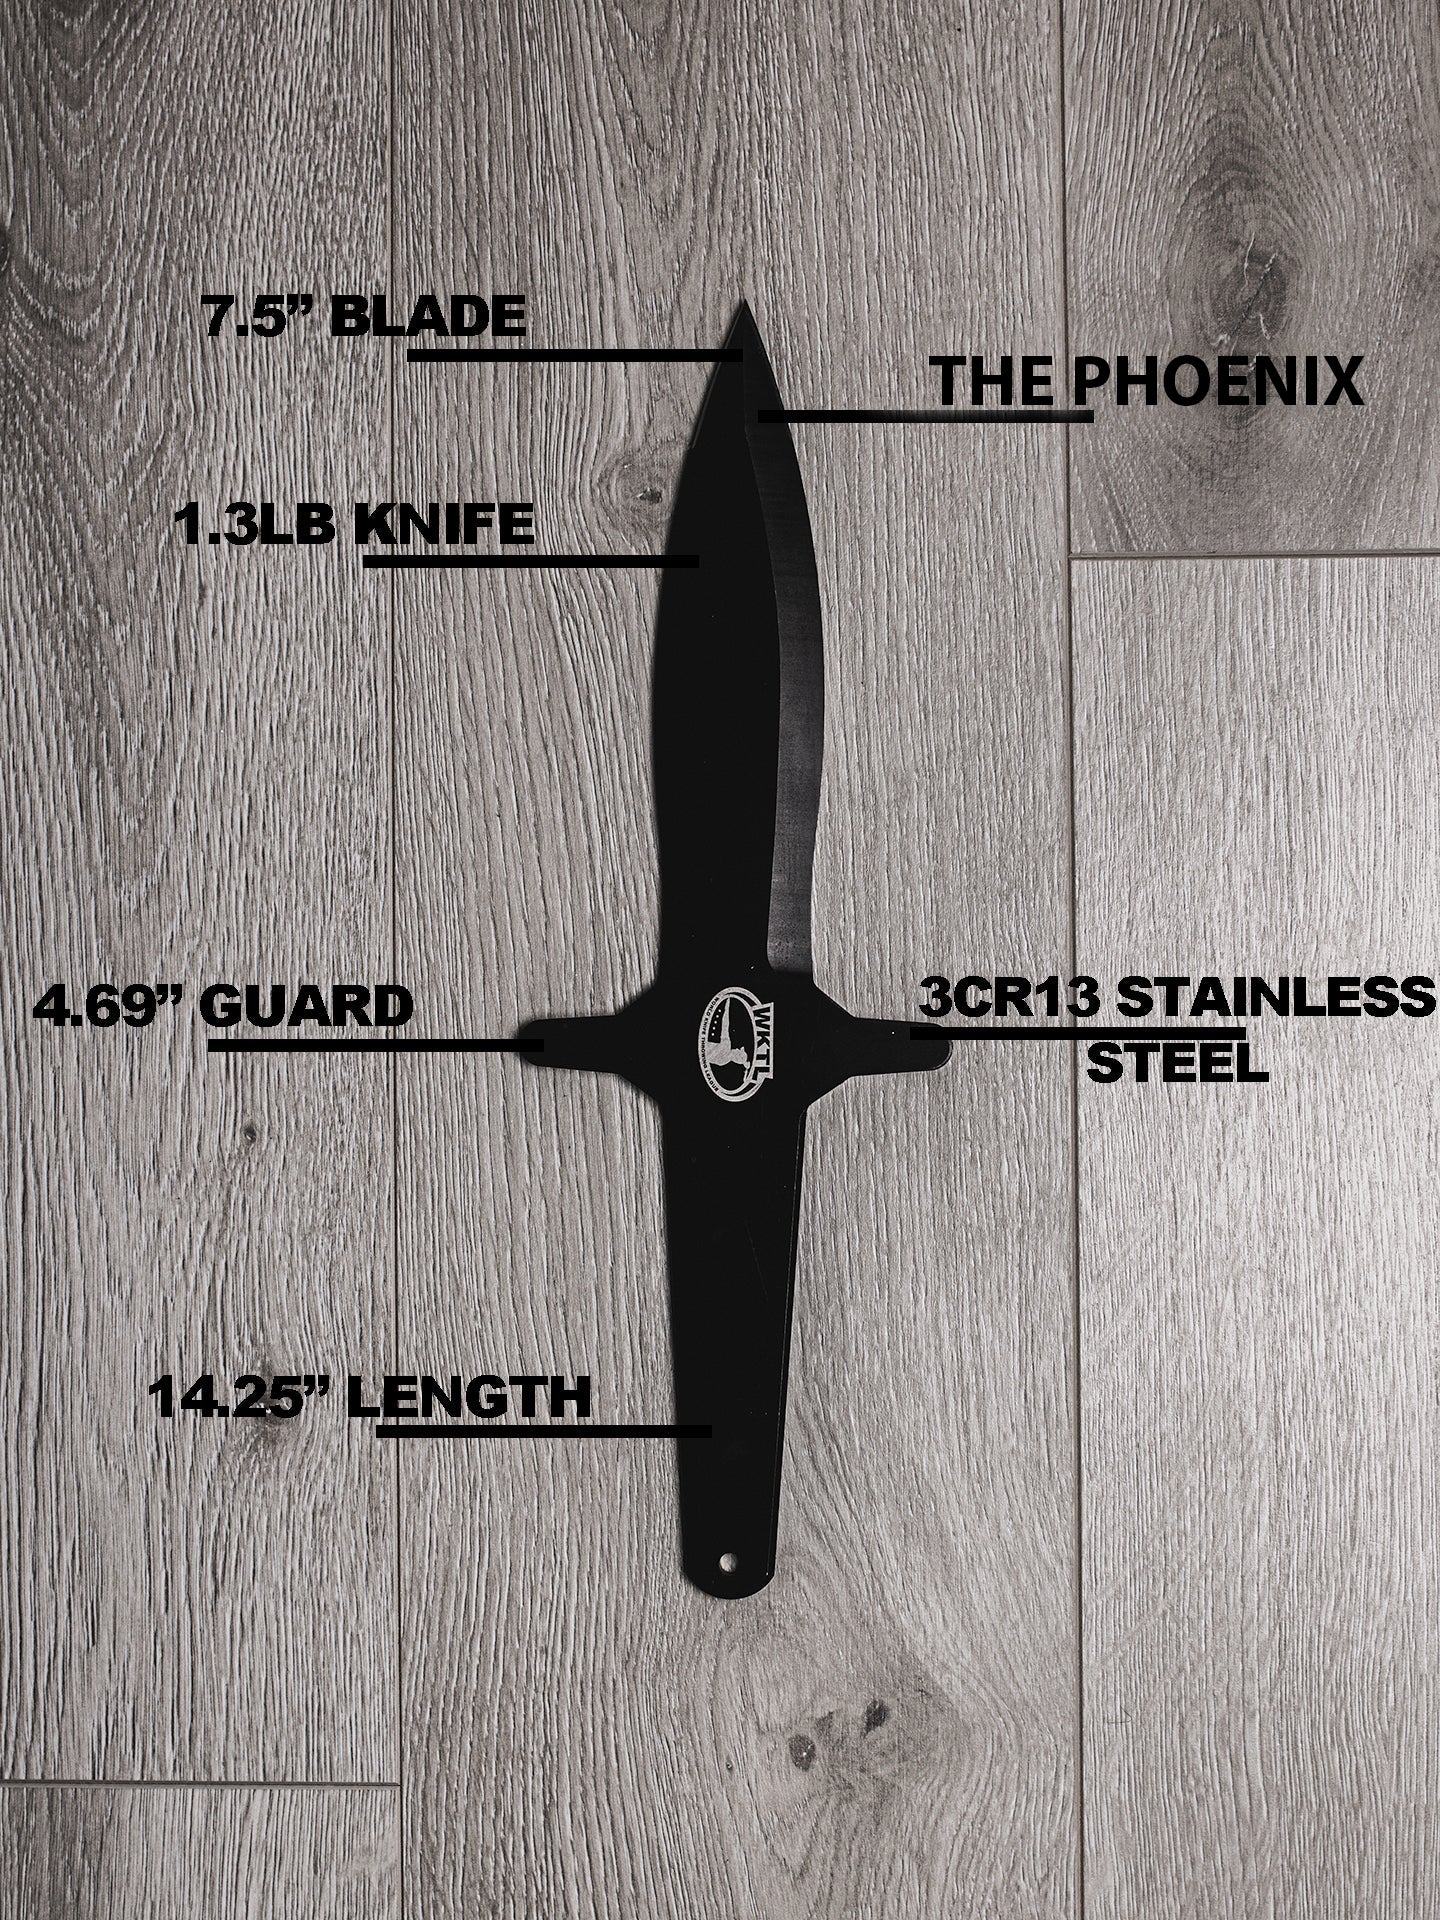 World Knife Throwing League (WKTL) Certified Competition Throwing Knife, The Phoenix Measurements